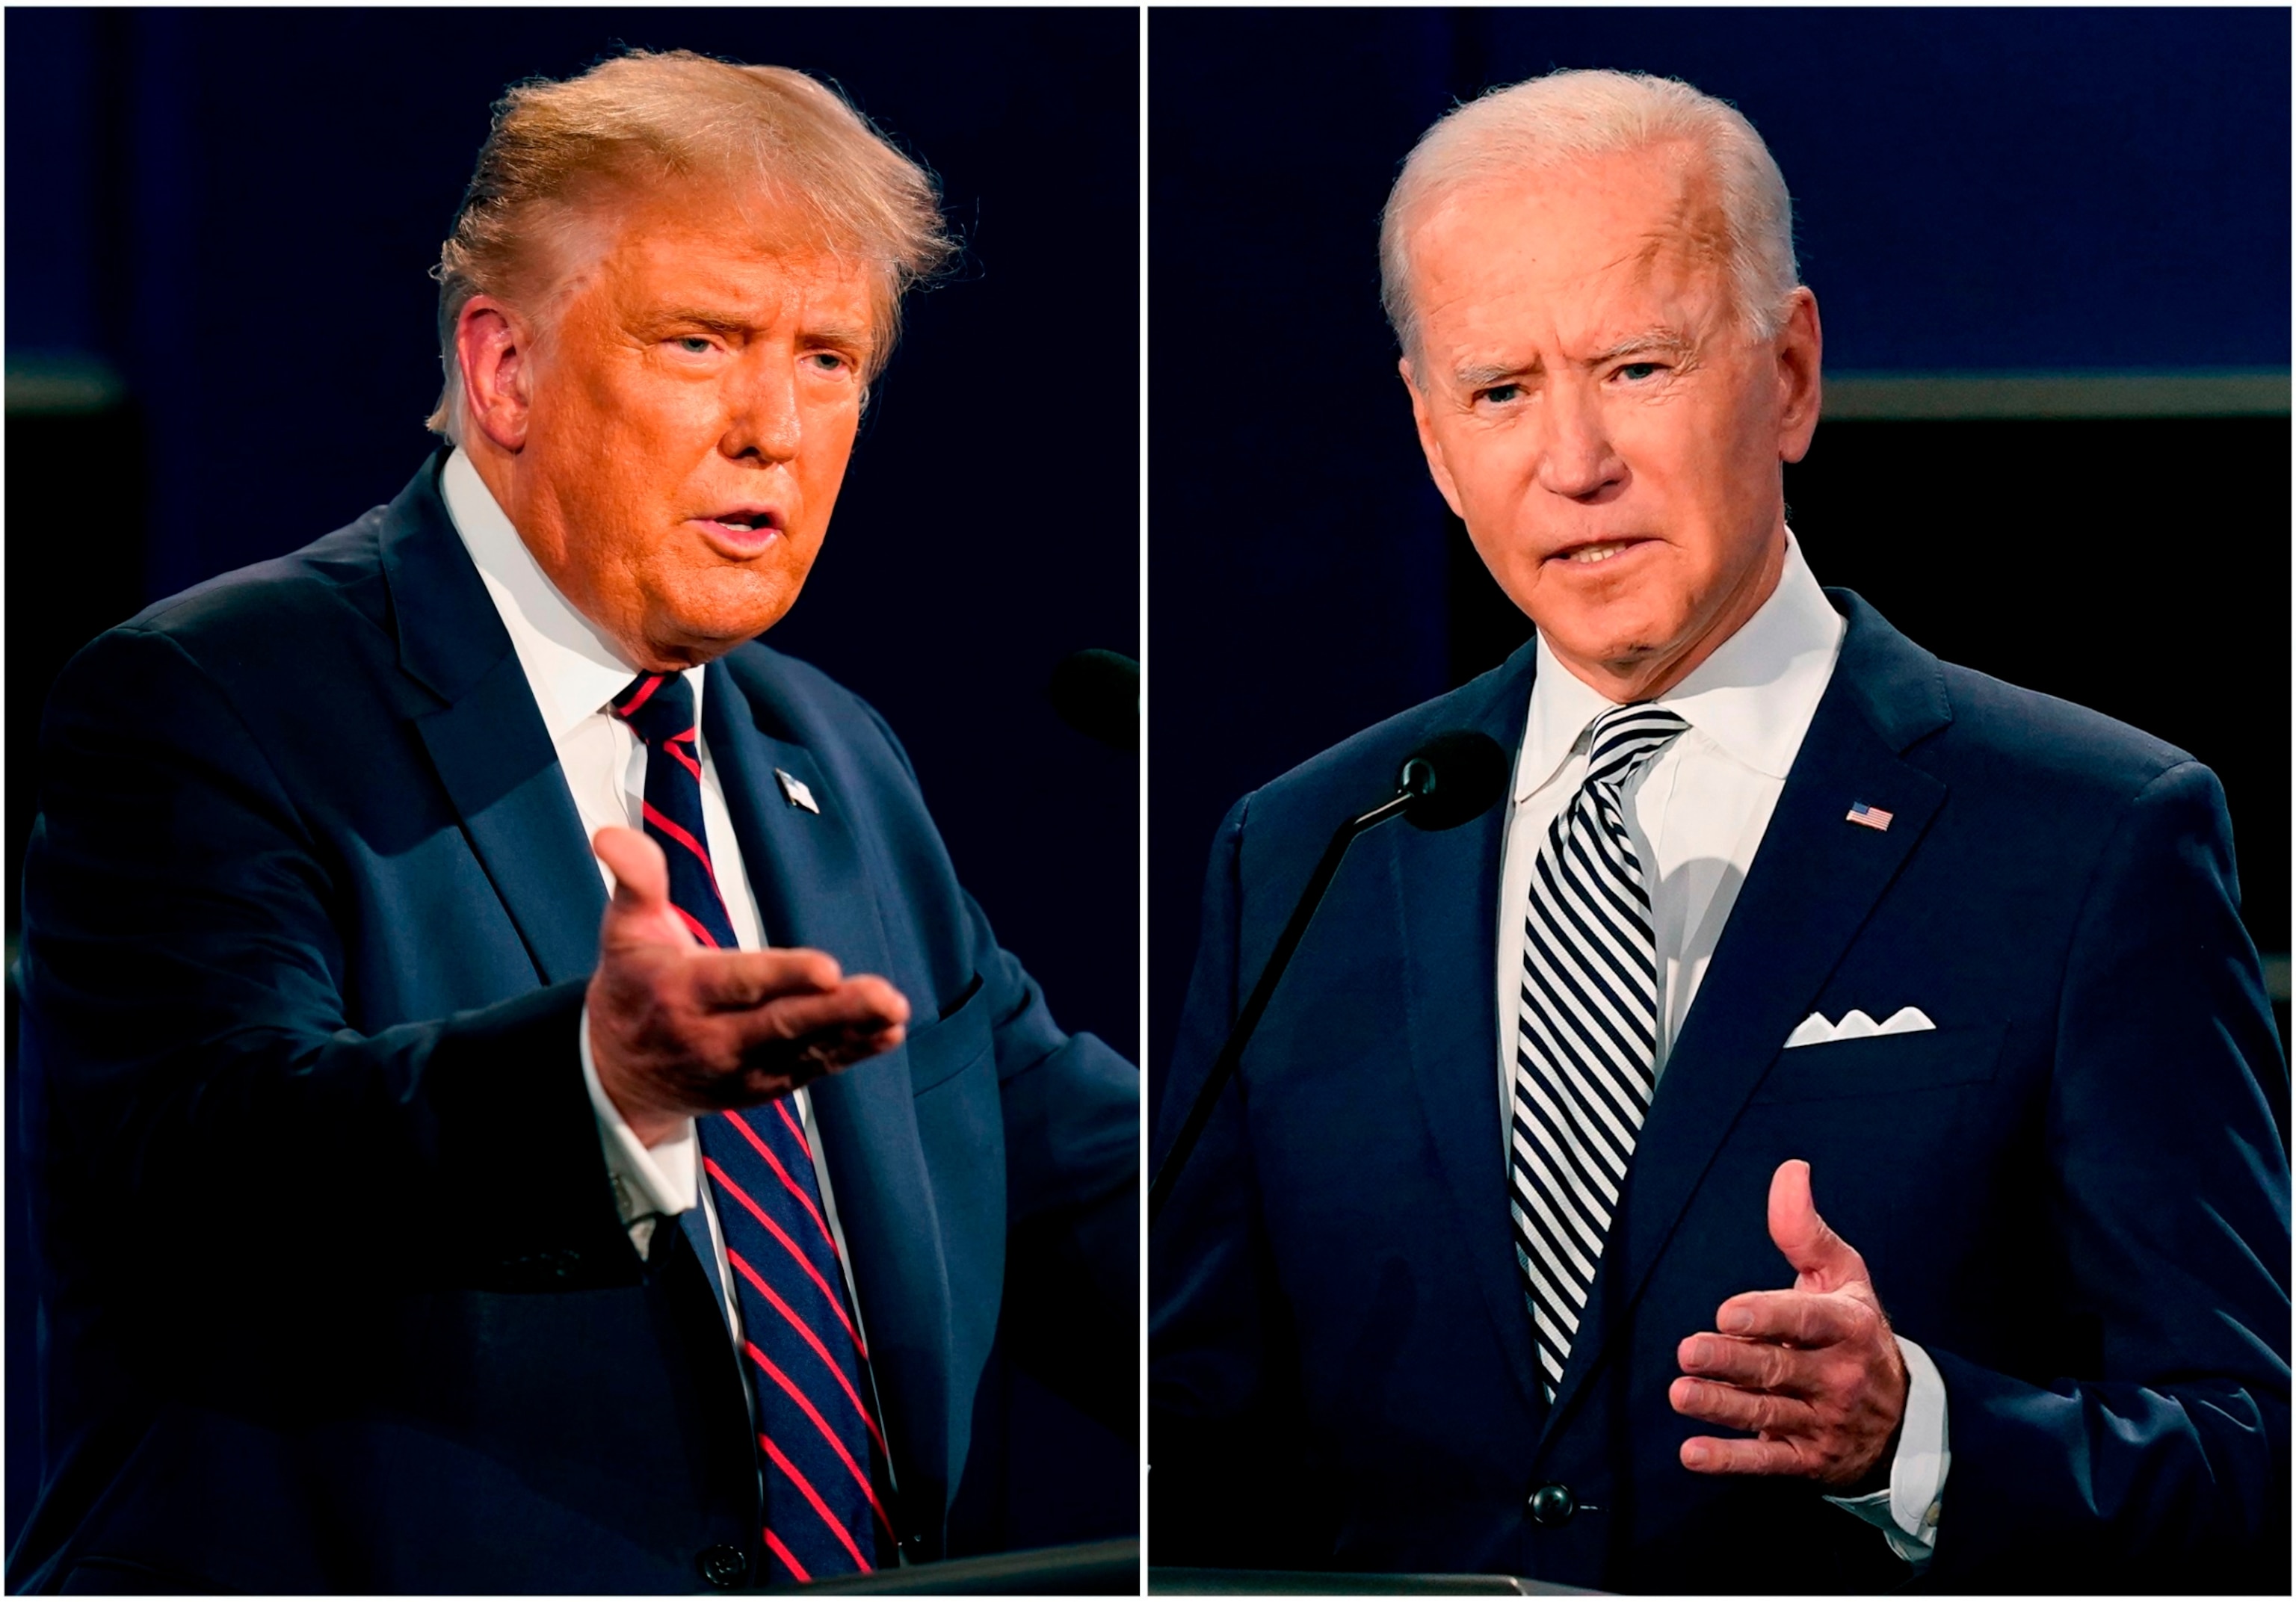 PHOTO: President Donald Trump, left, and former Vice President Joe Biden during the first presidential debate at Case Western University and Cleveland Clinic, in Cleveland, Ohio.